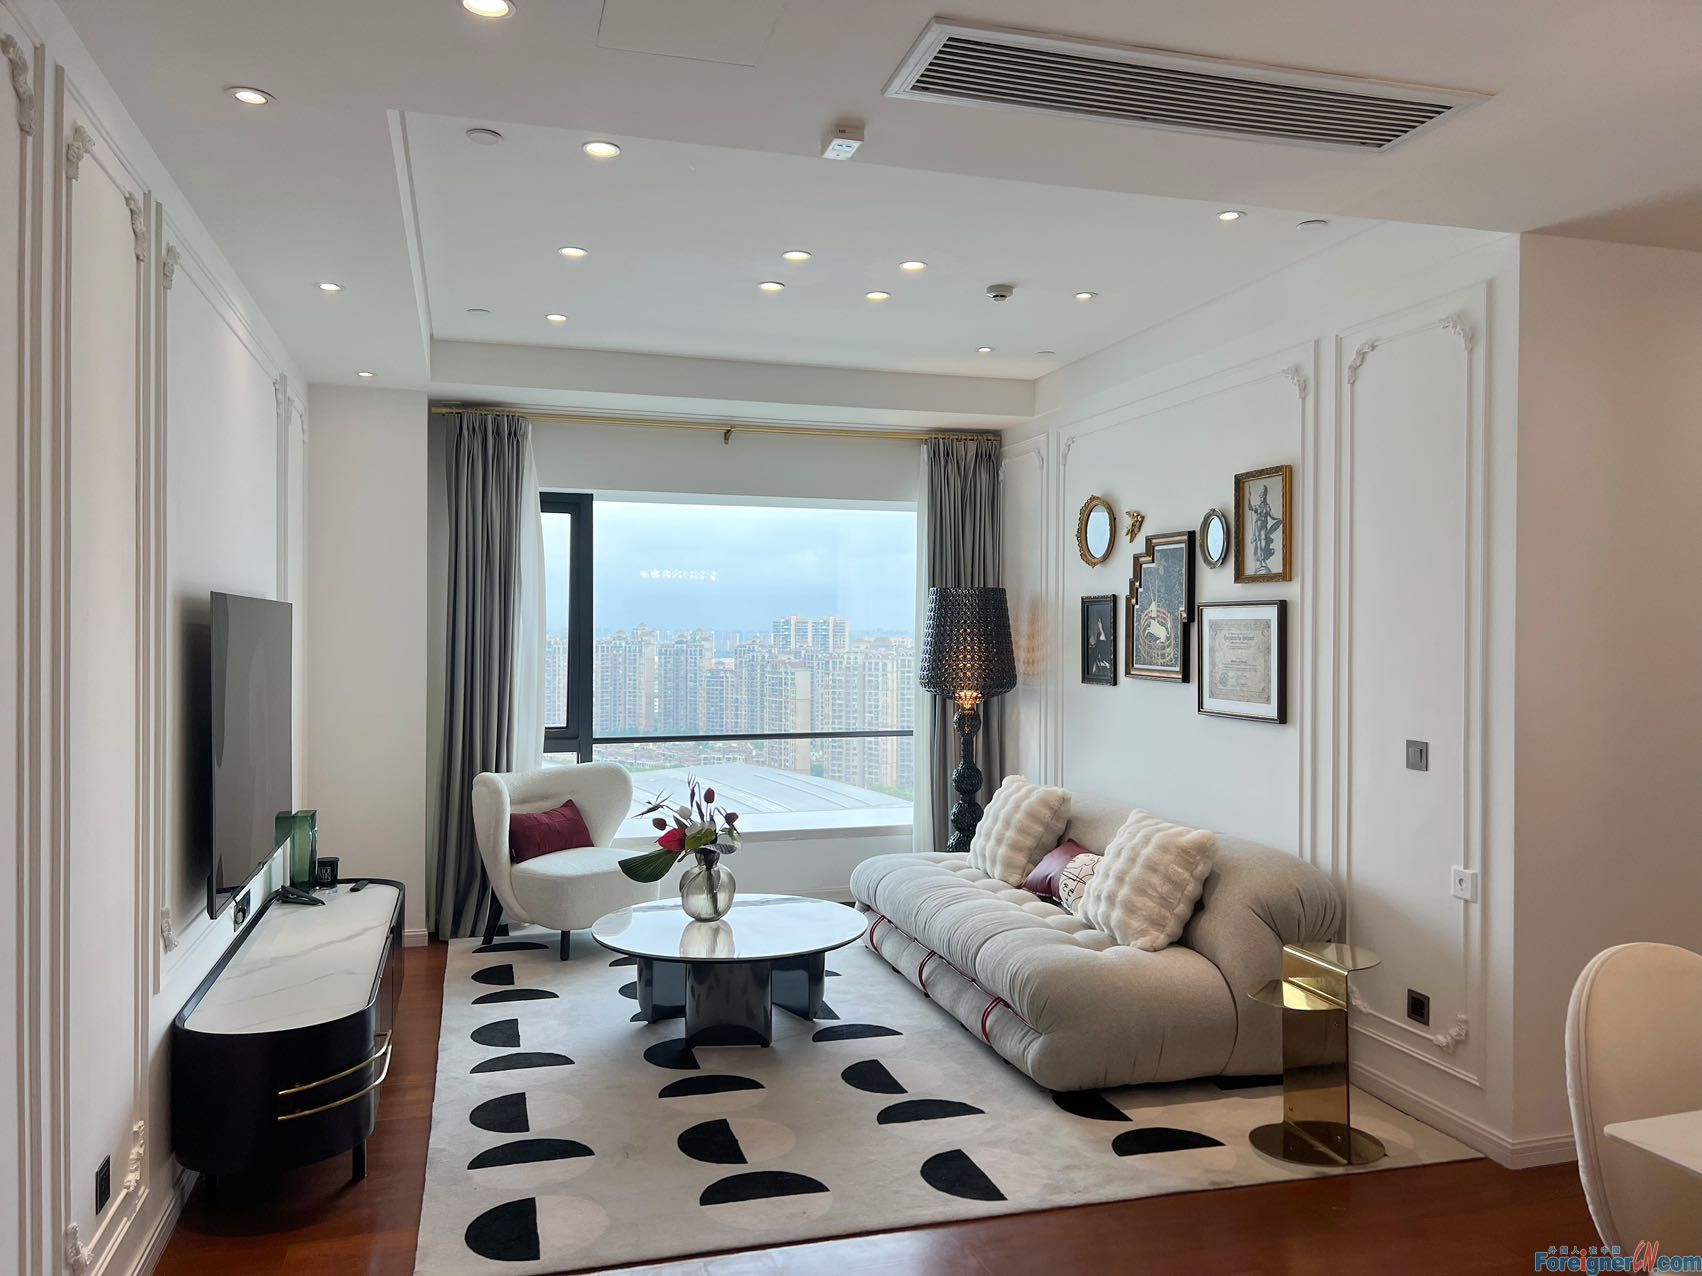 Wonderful !! Eslite Residence apartment to rent in SIP/ Floor heating and central AC/lots of light room/Nearby Jinji Lake and Moon habor,Time Square,Subway line 1